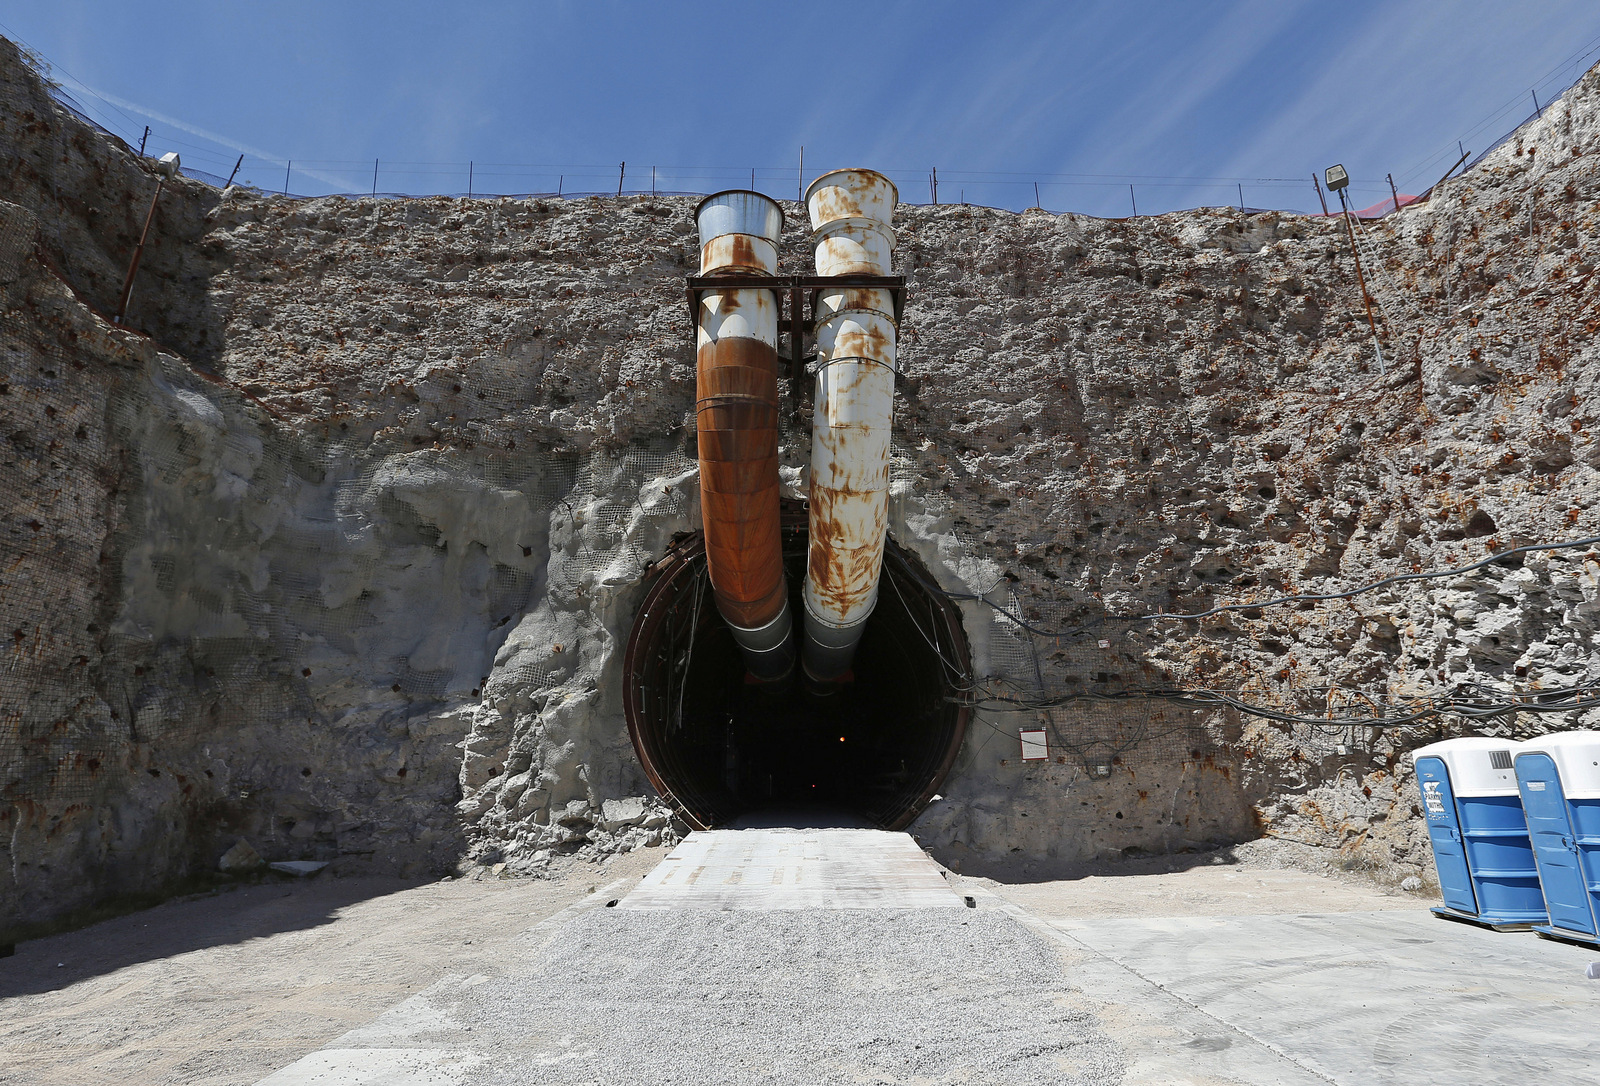 The south portal of the proposed Yucca Mountain nuclear waste dump near Mercury, Nev. (AP Photo/John Locher)